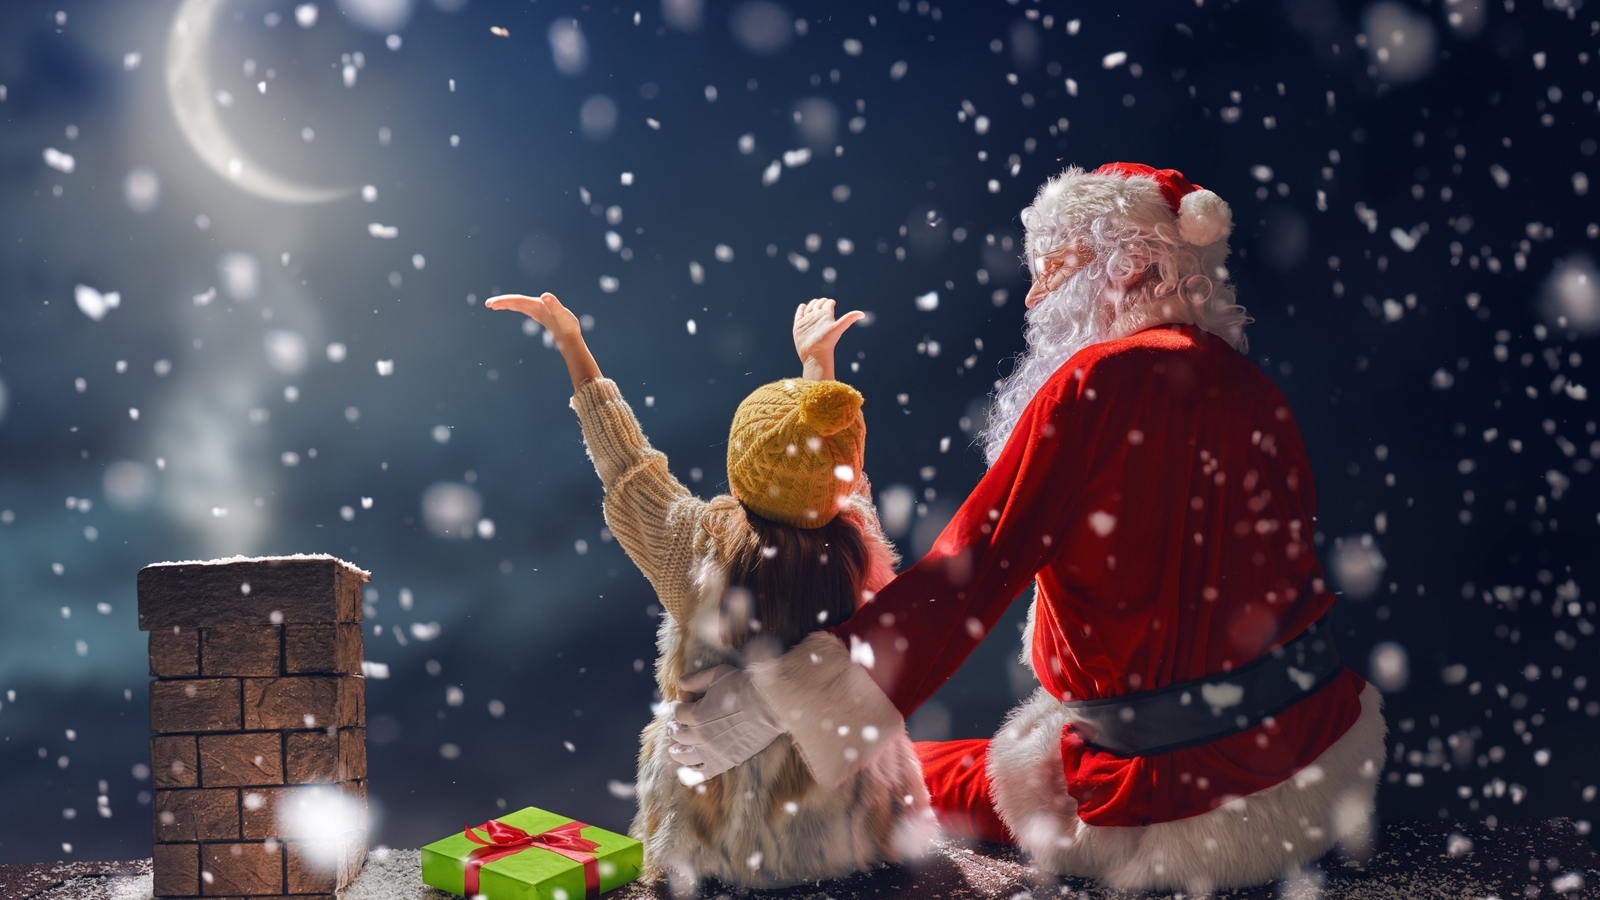 Image: Santa Claus, girl, gift, New year, Christmas, pipe, roof